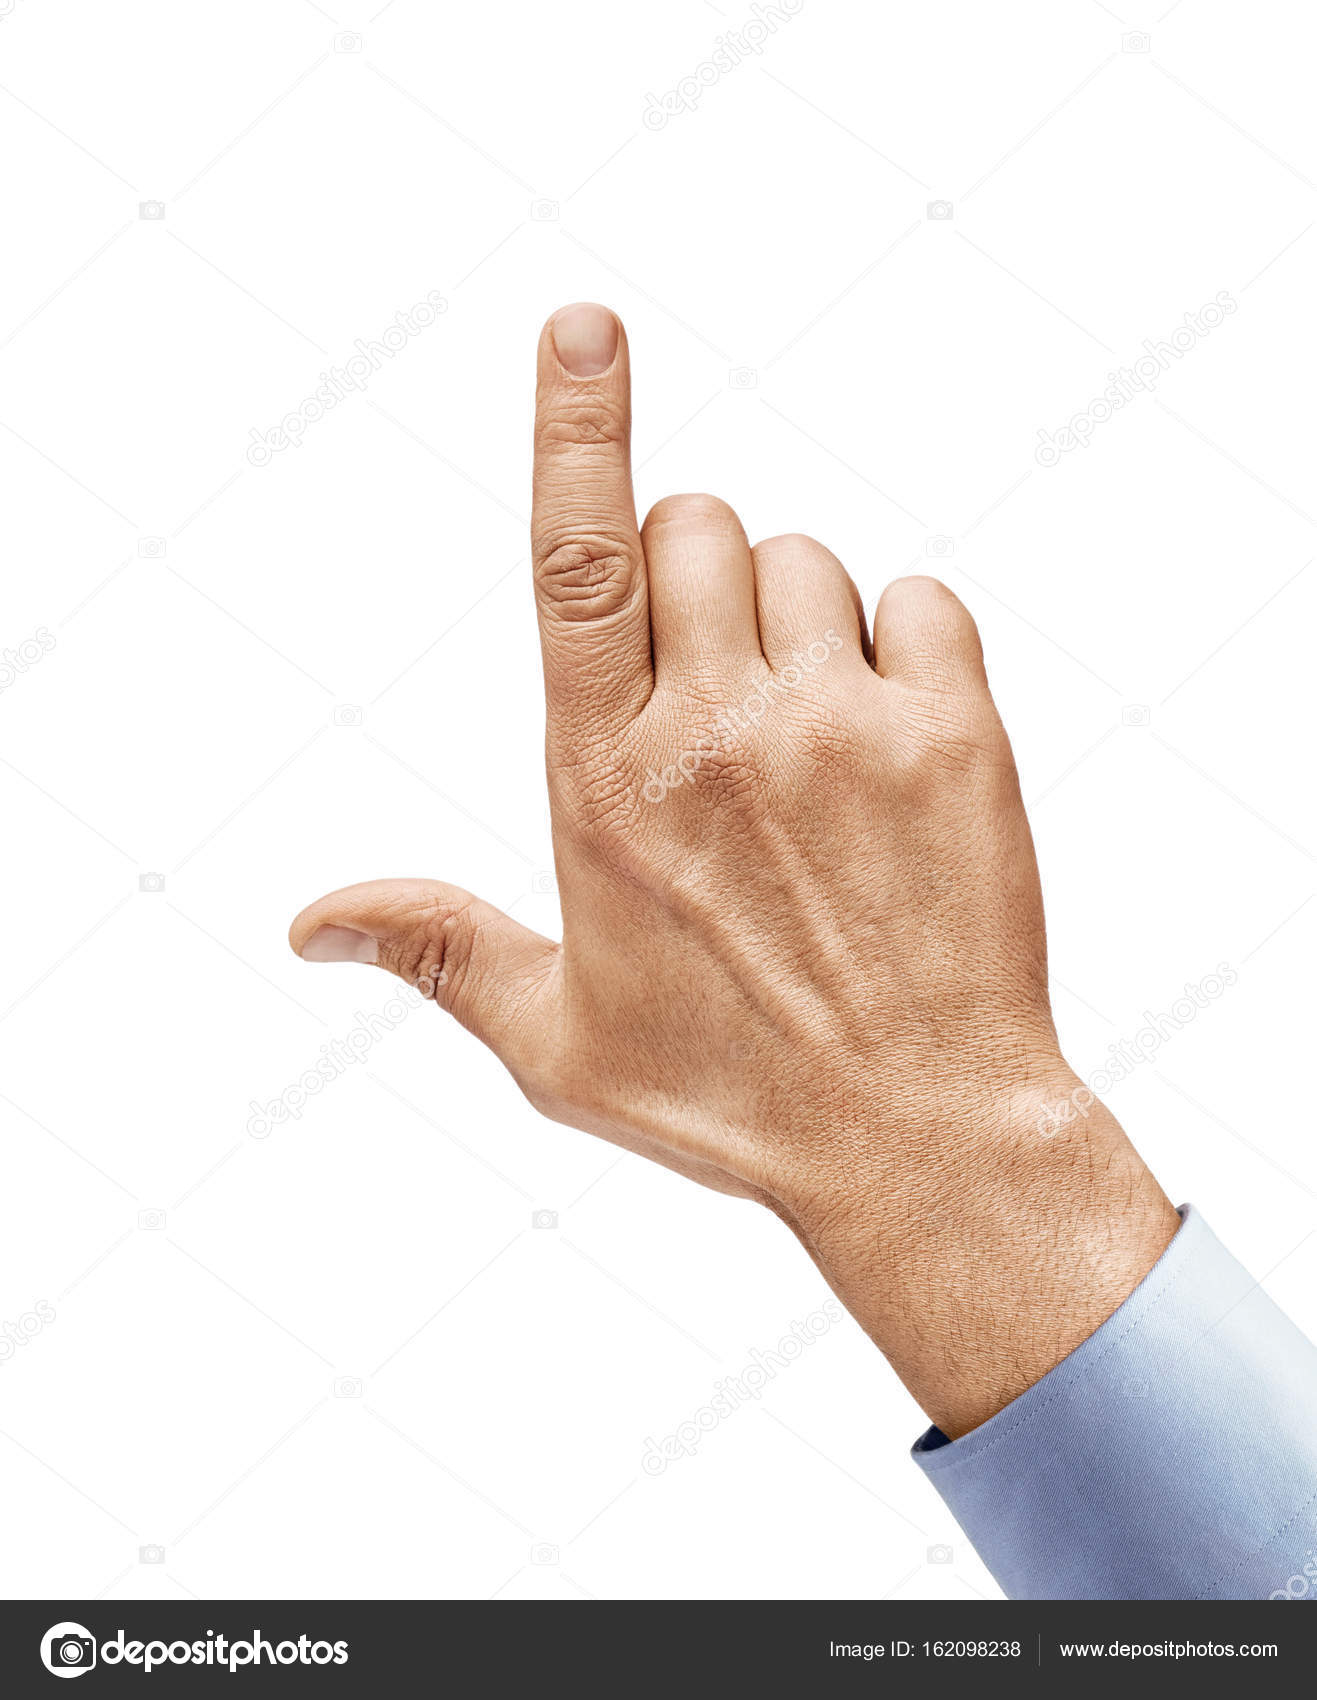 Man's hand in a shirt touching or pointing to something isolated on ...